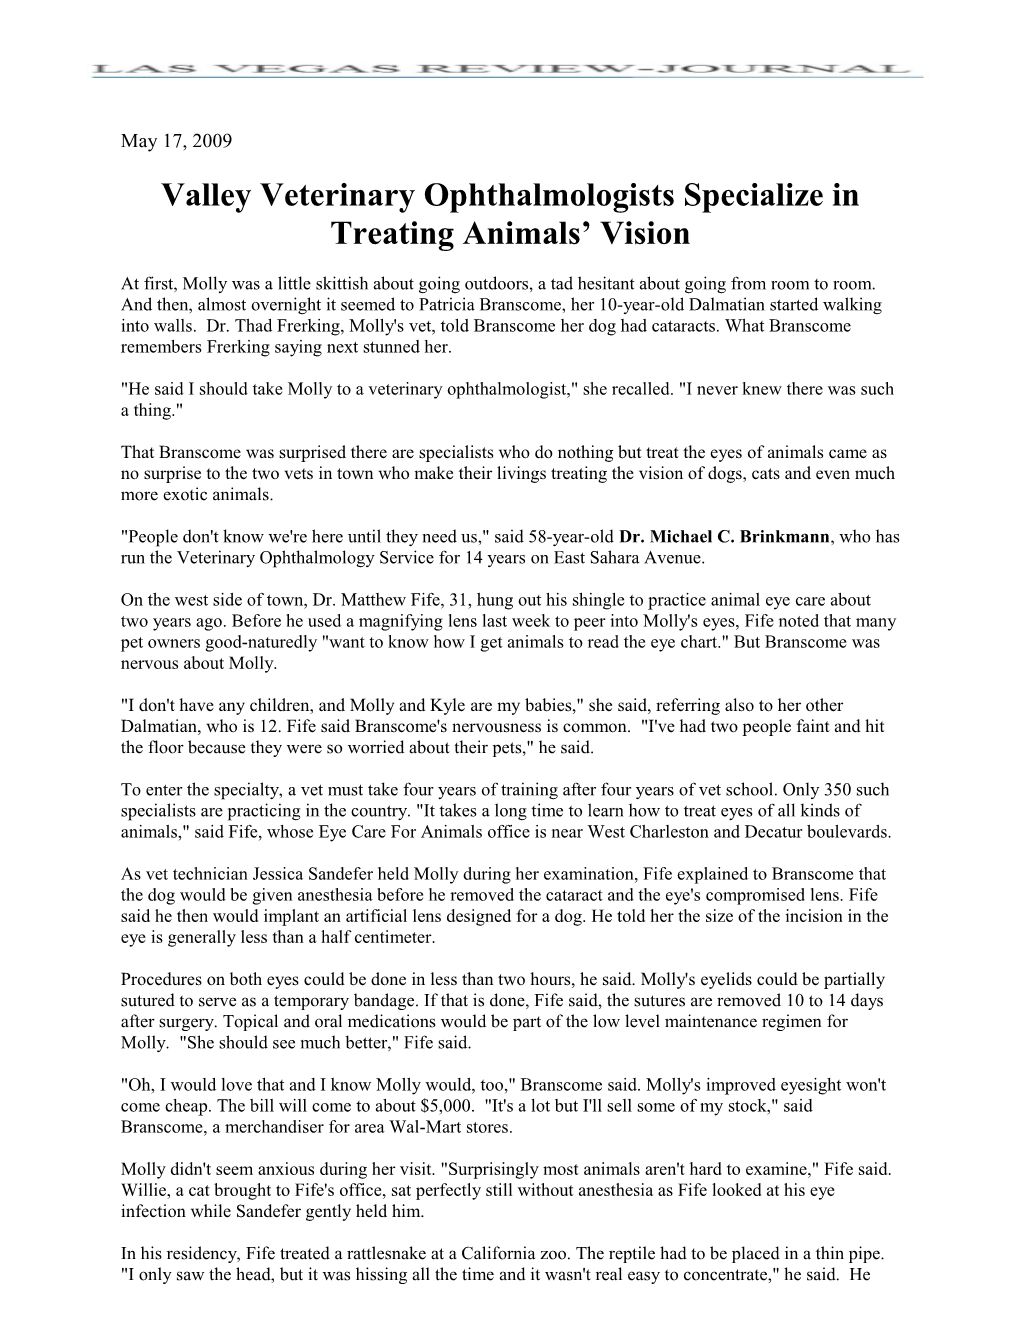 Valley Veterinary Ophthalmologists Specialize in Treating Animals Vision